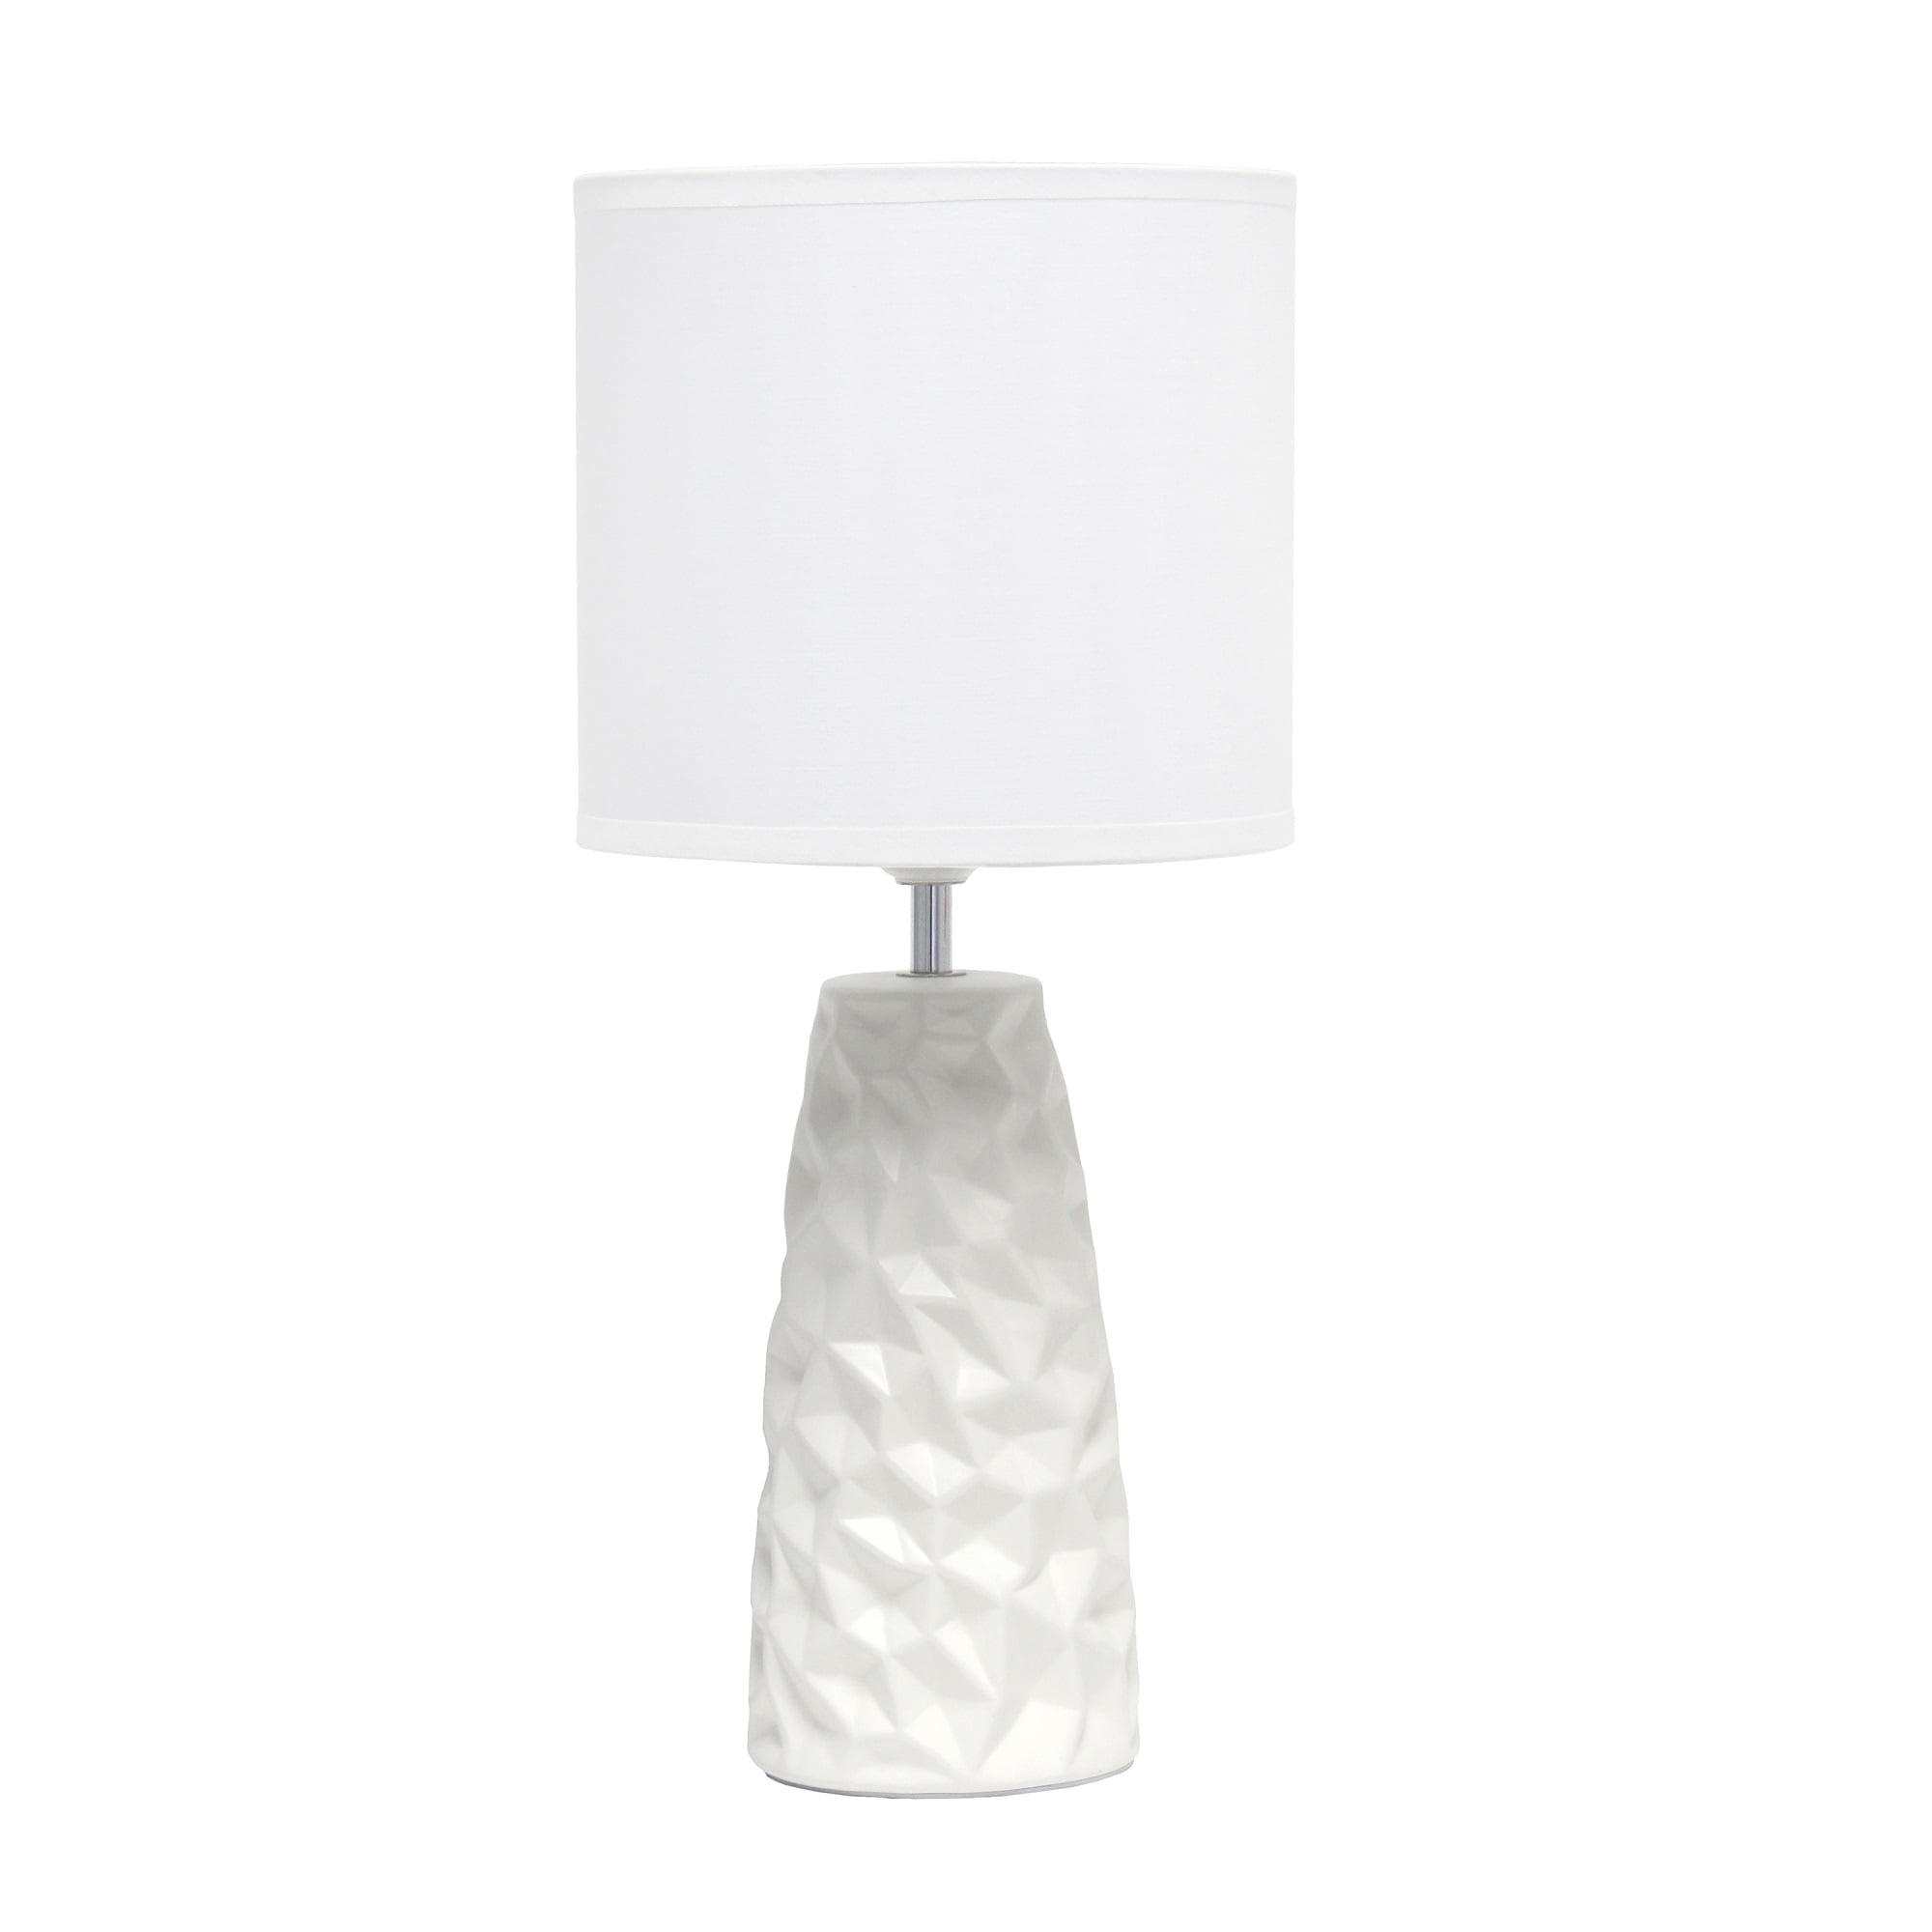 Simple Designs Sculpted Ceramic Table Lamp, Off White